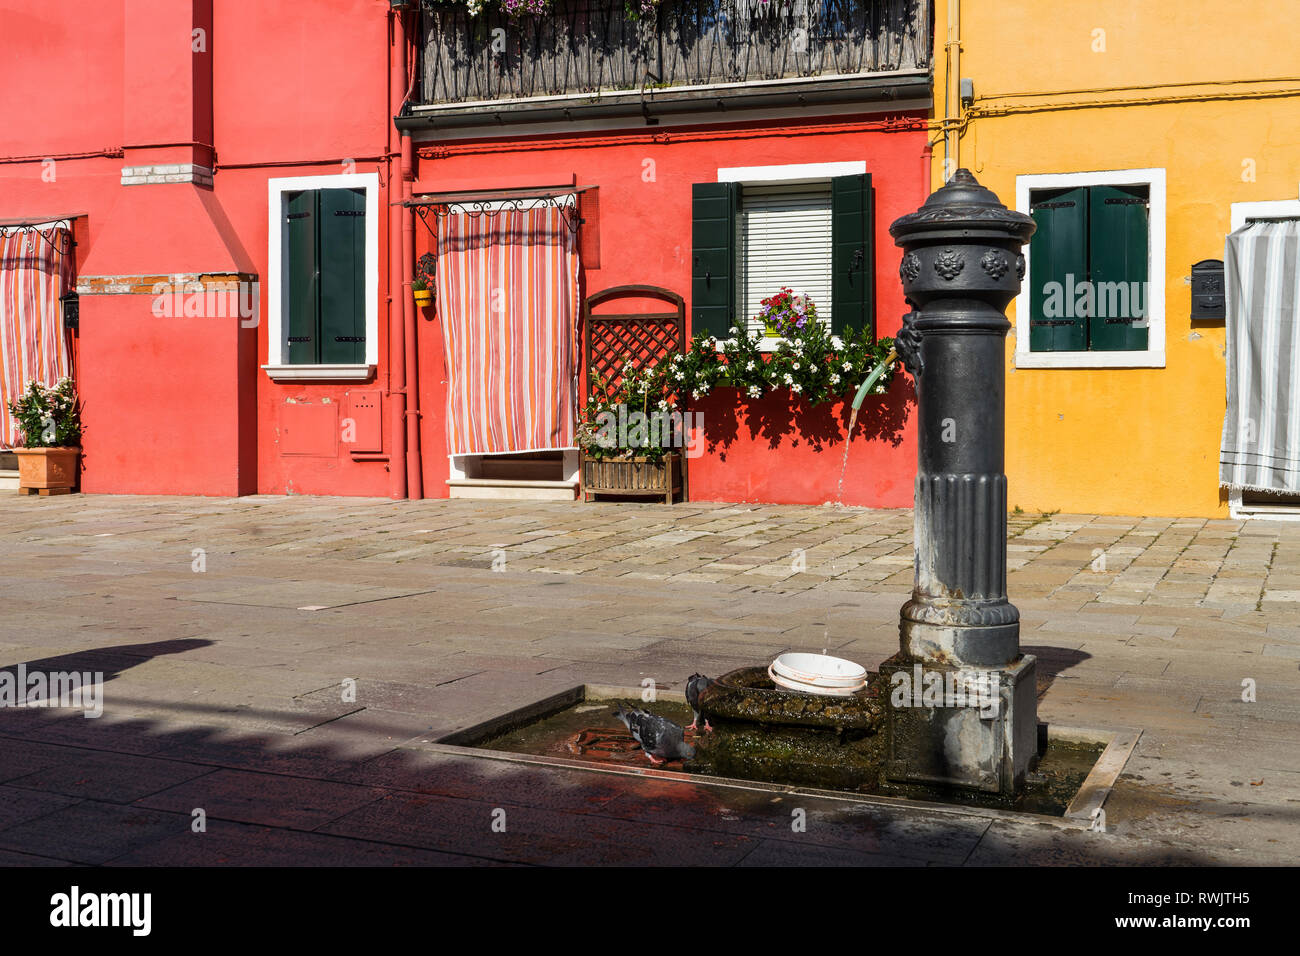 Colorful buildings in Burano, Italy, Europe Stock Photo